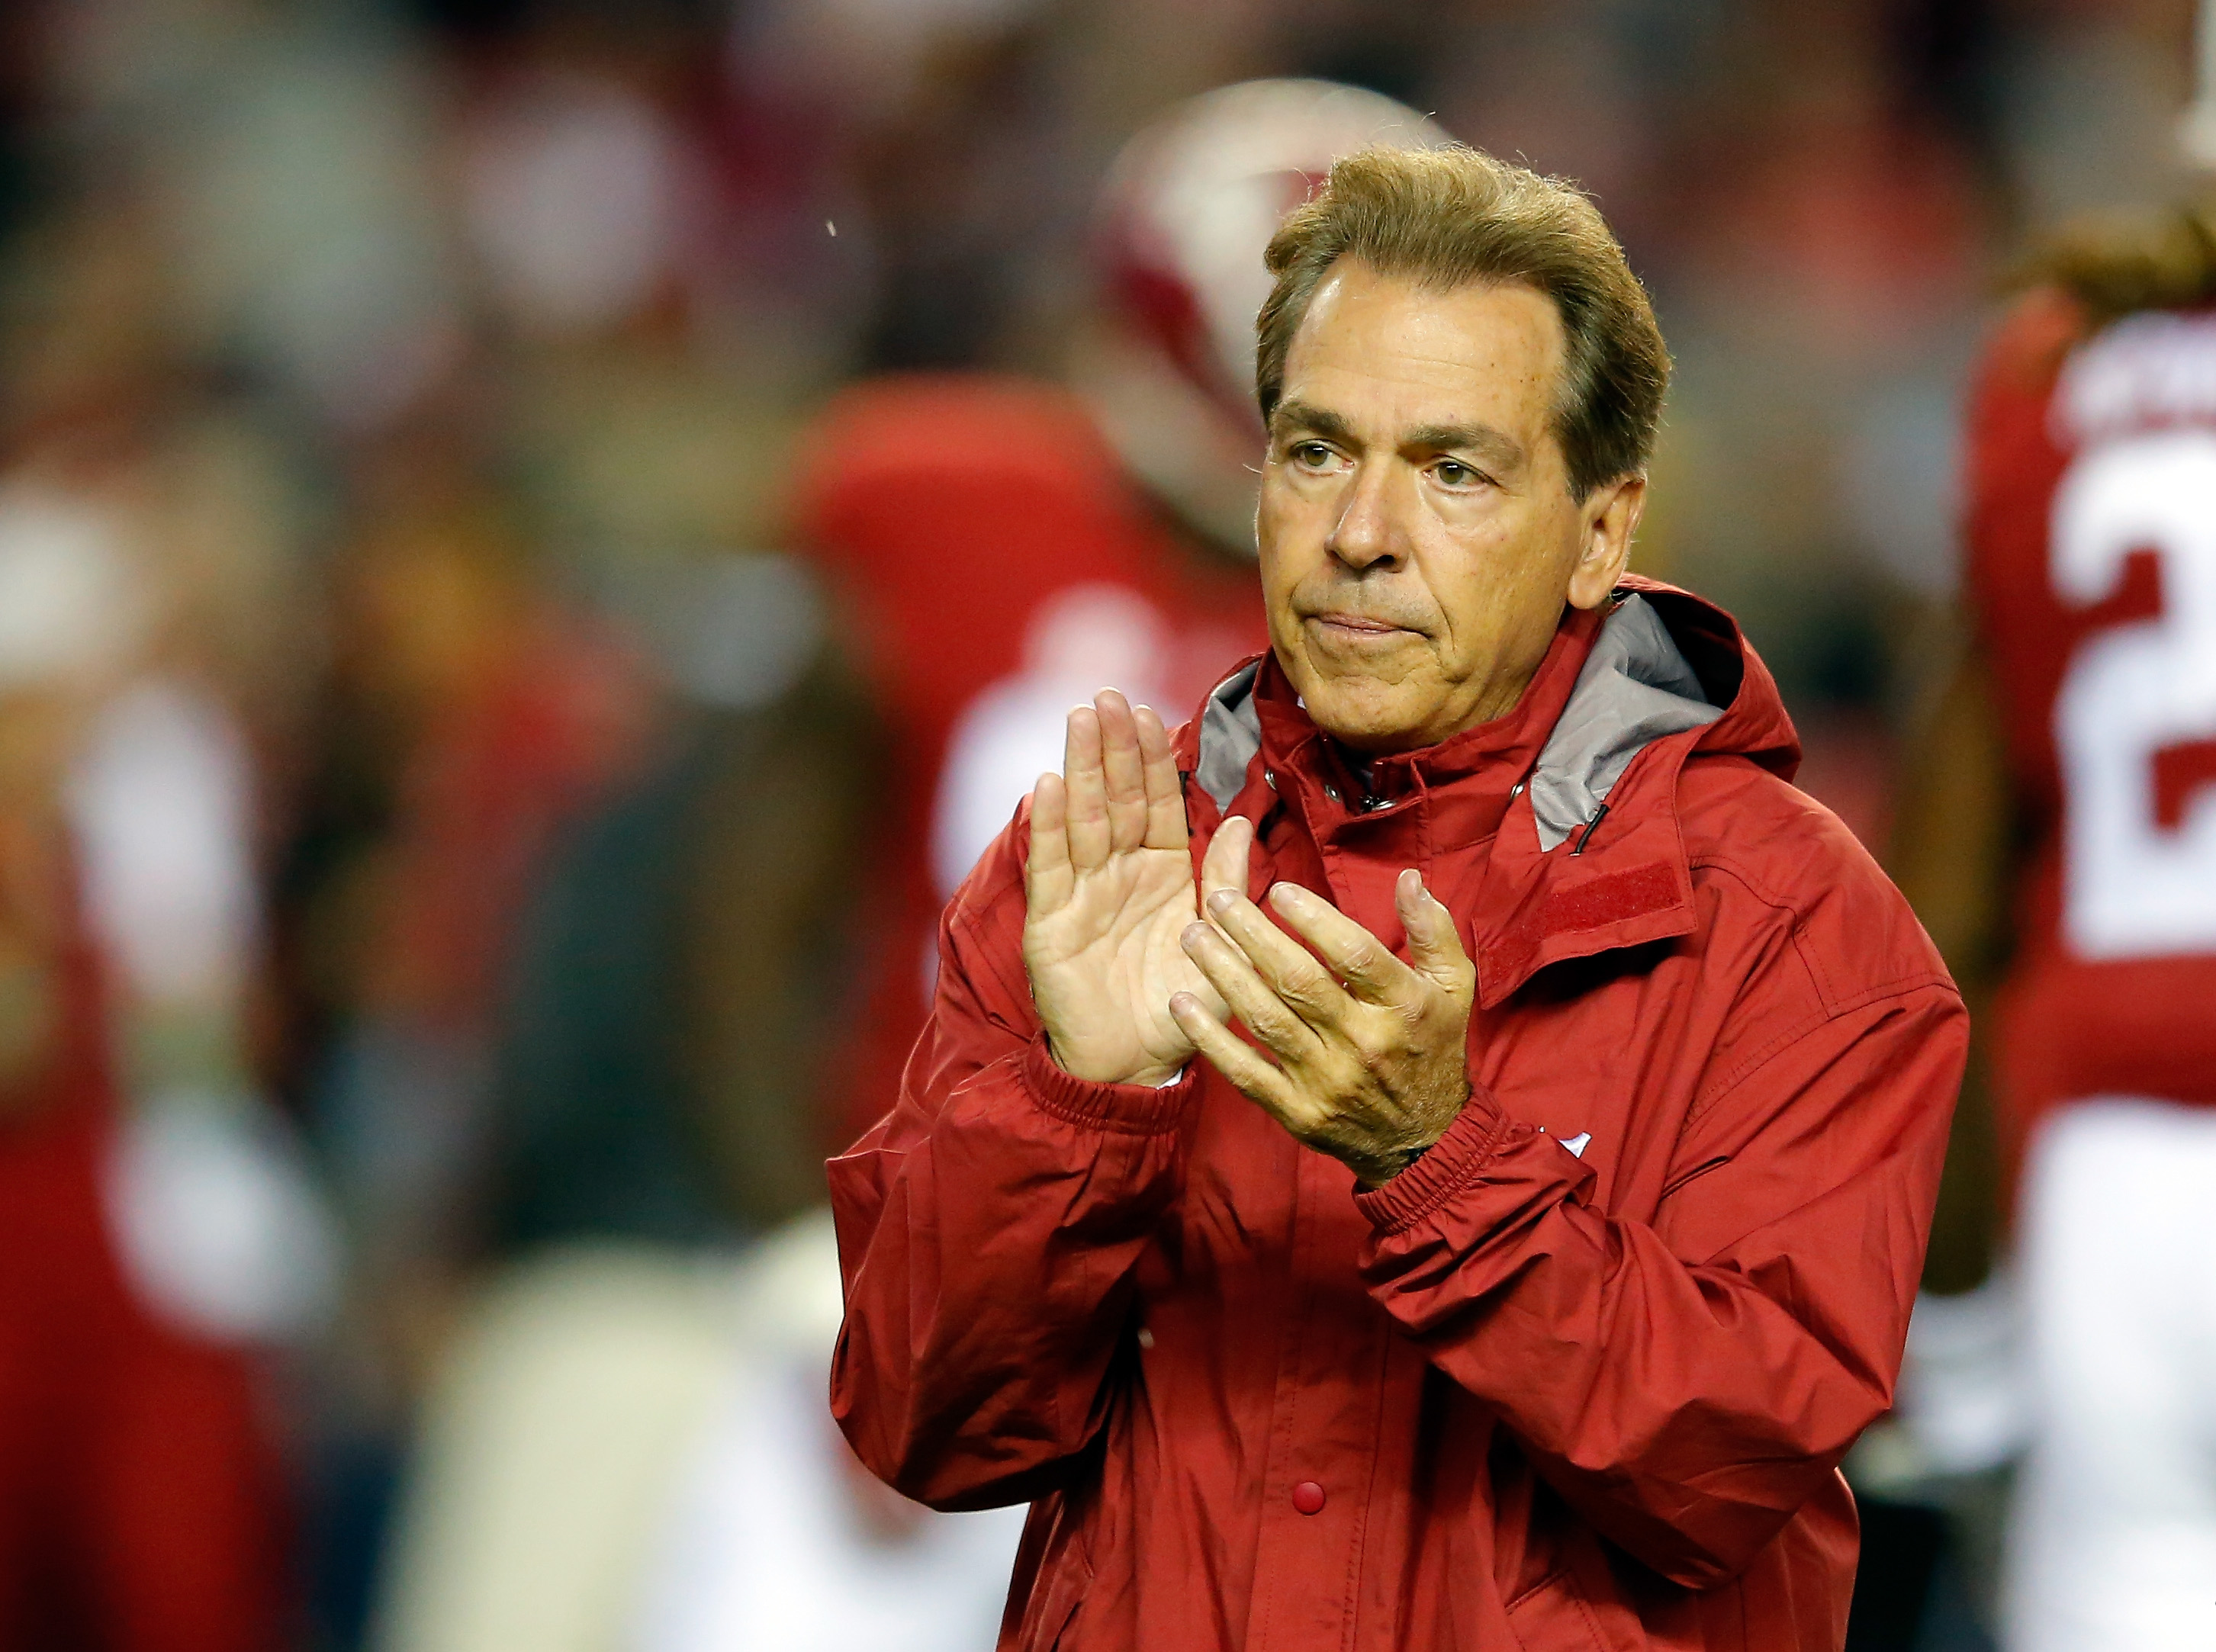 Nick Saban, head coach of the Alabama Crimson Tide (Photo by Kevin C. Cox/Getty Images)